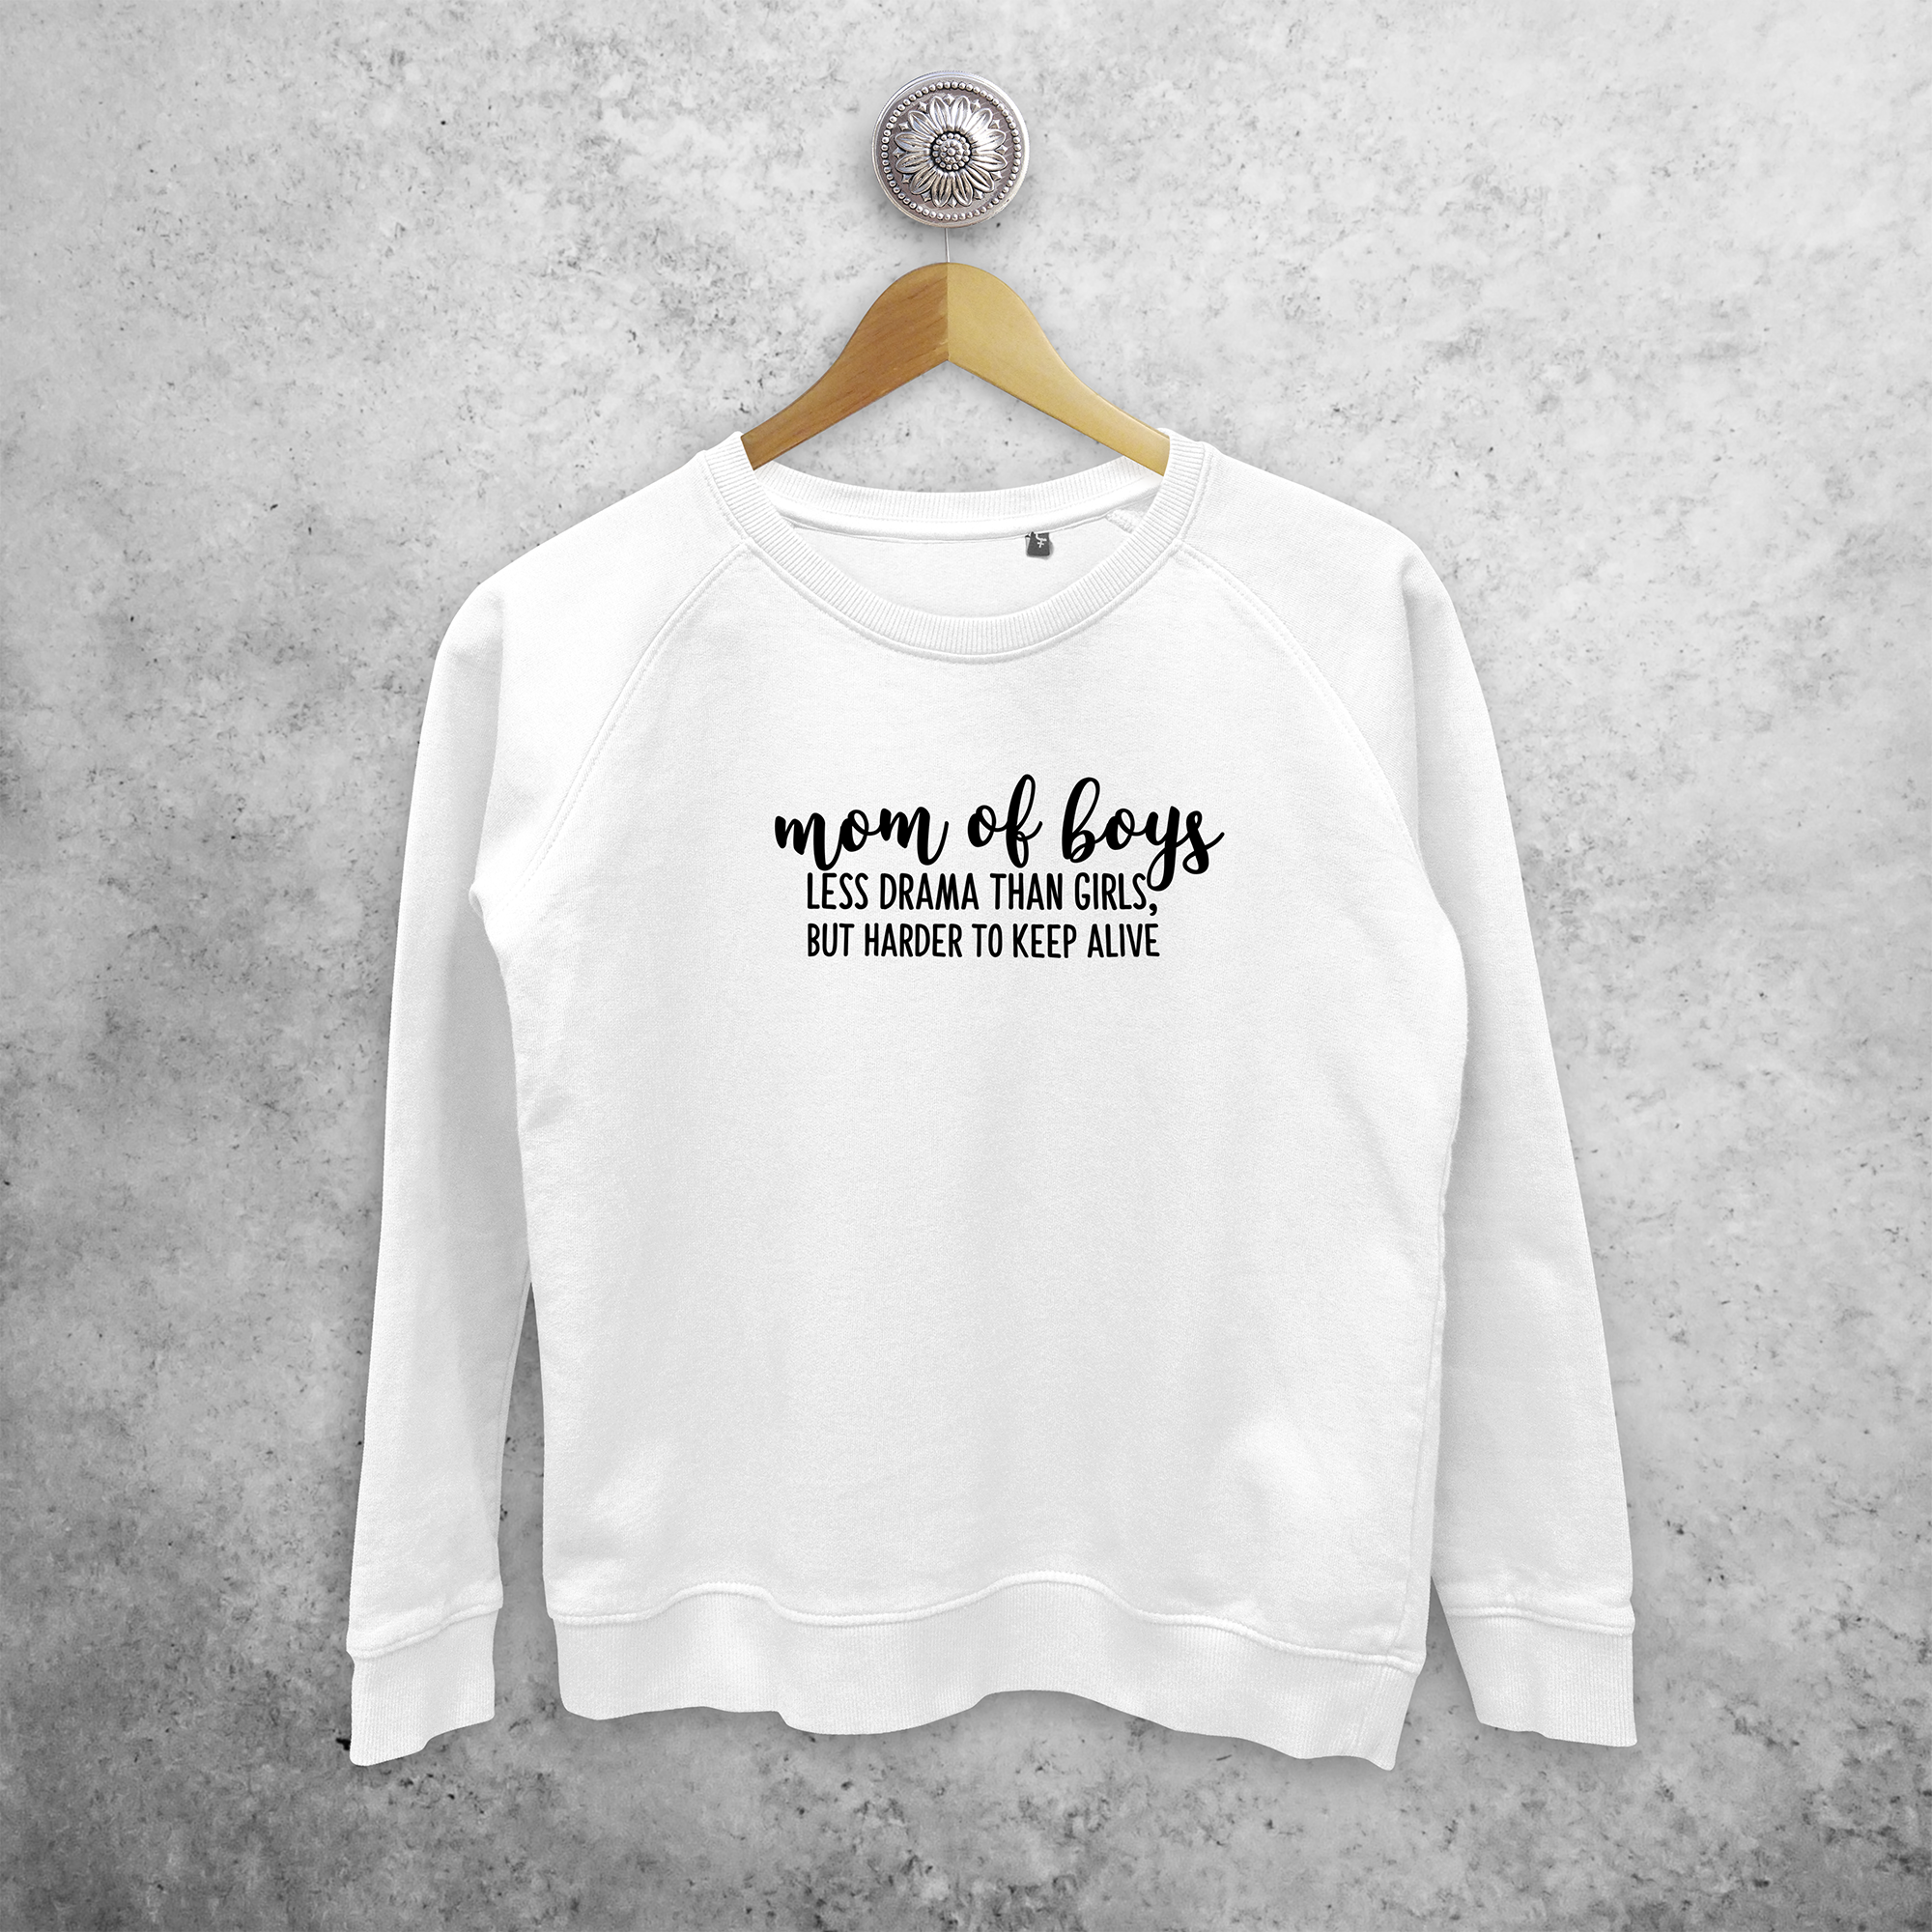 'Mom of boys - Less drama than girls, but harder to keep alive' sweater